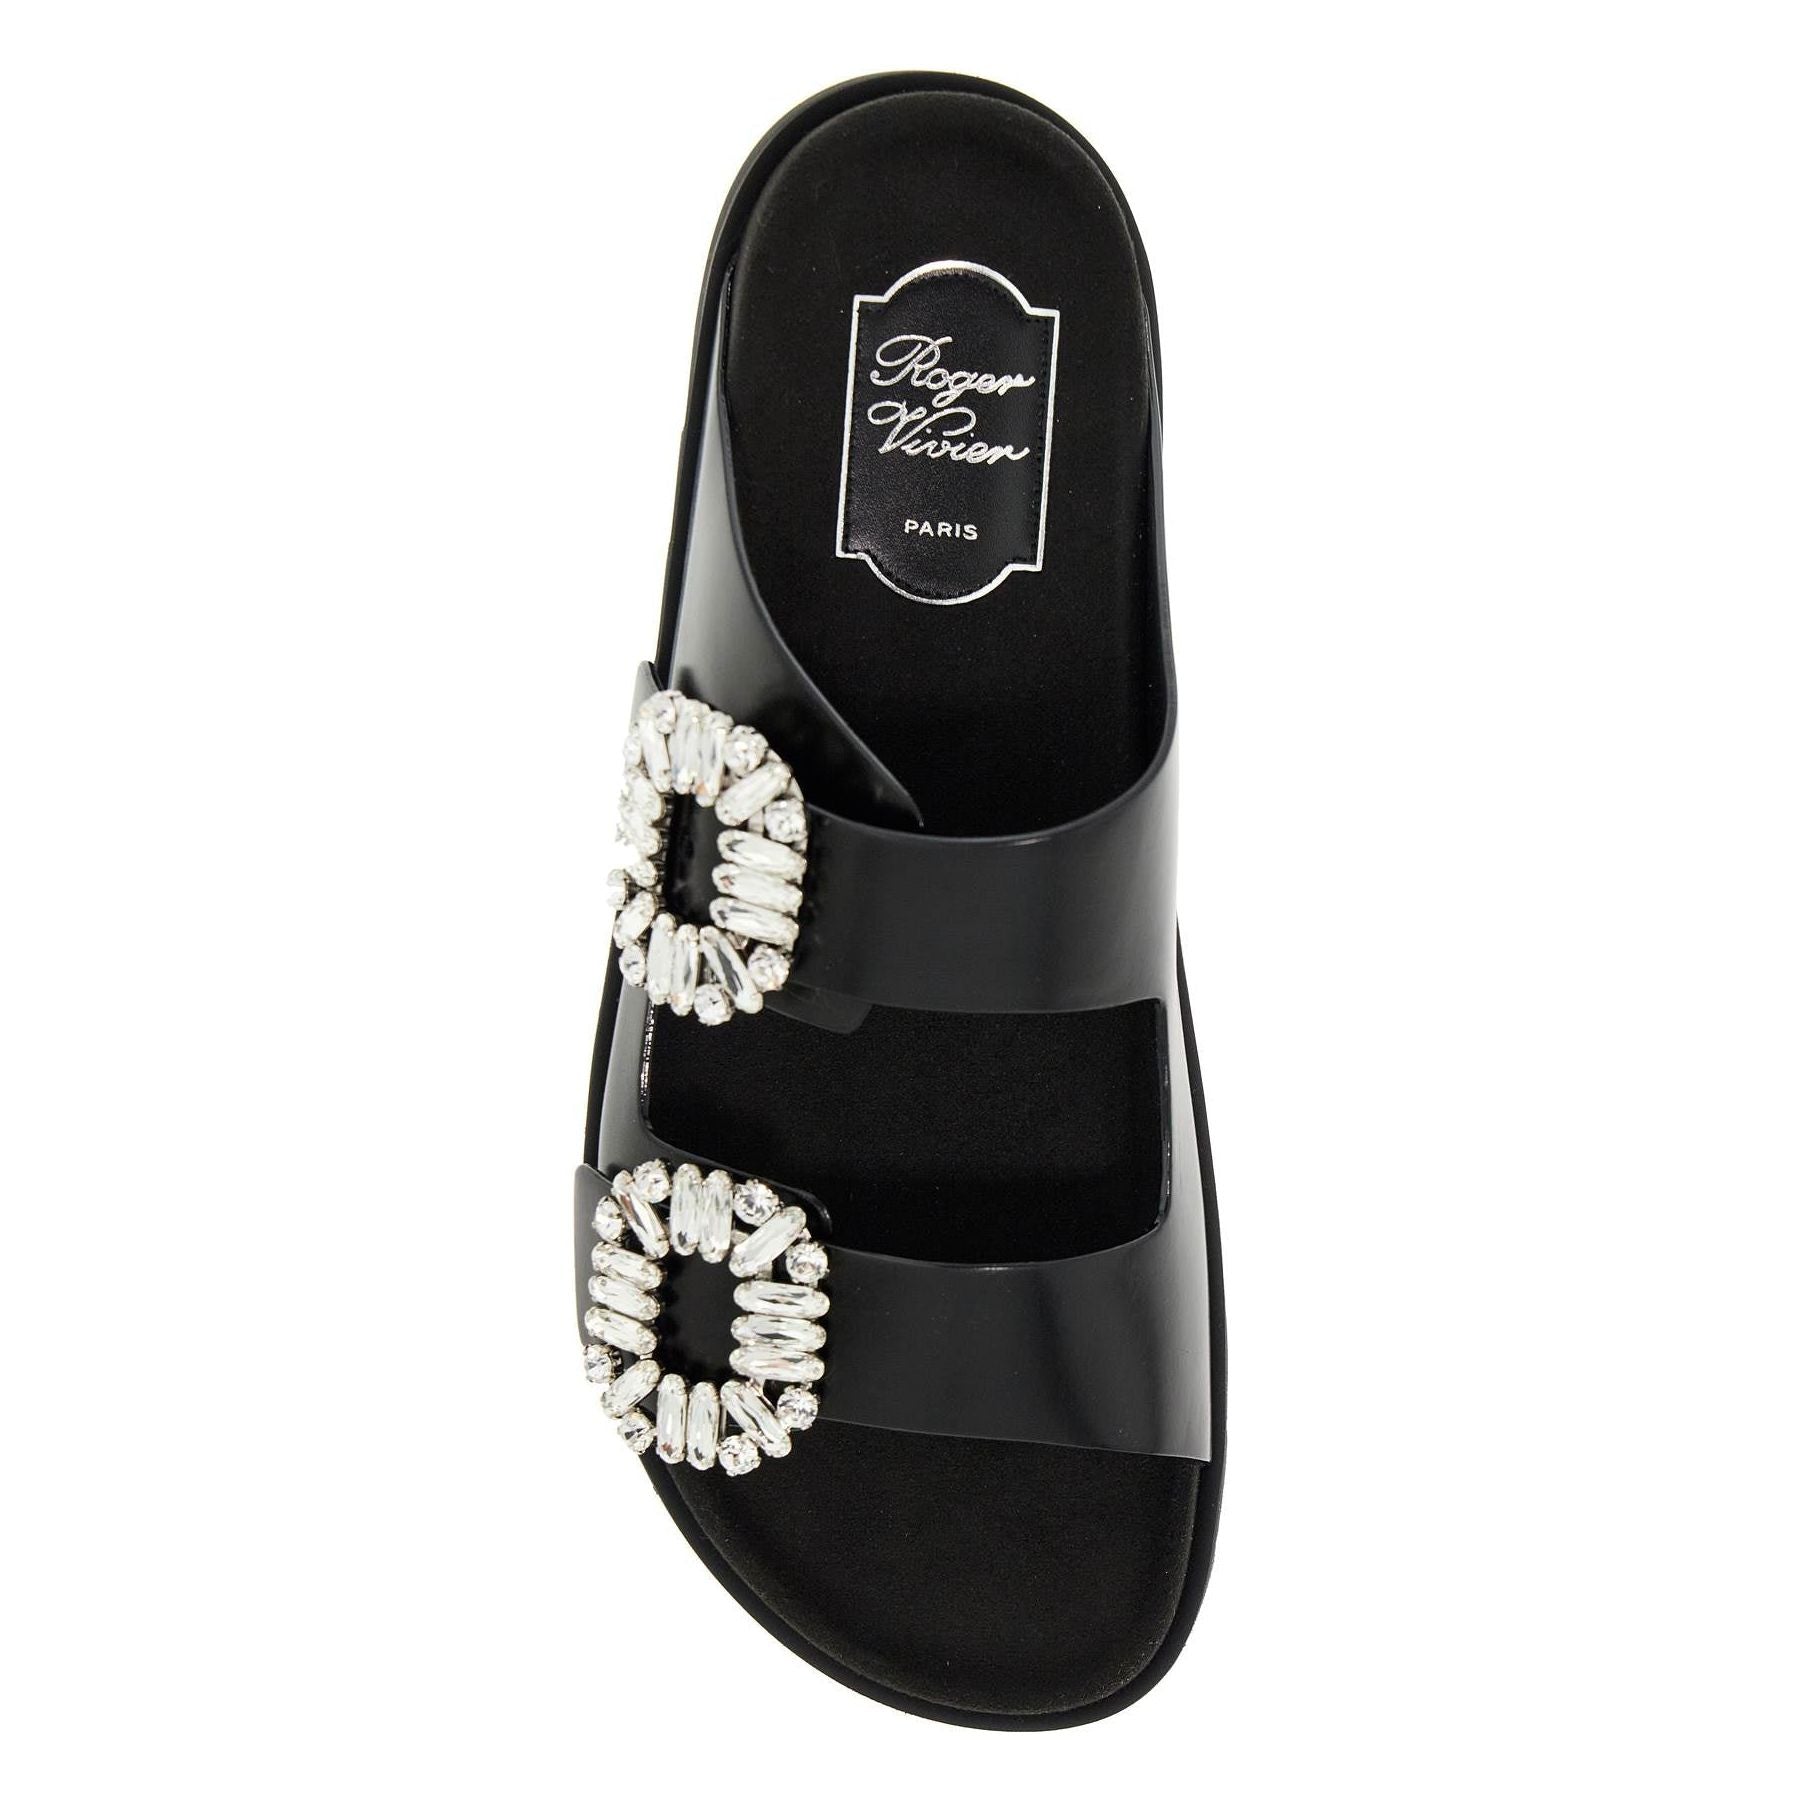 Slidy Viv' Strass Buckle Leather Mules